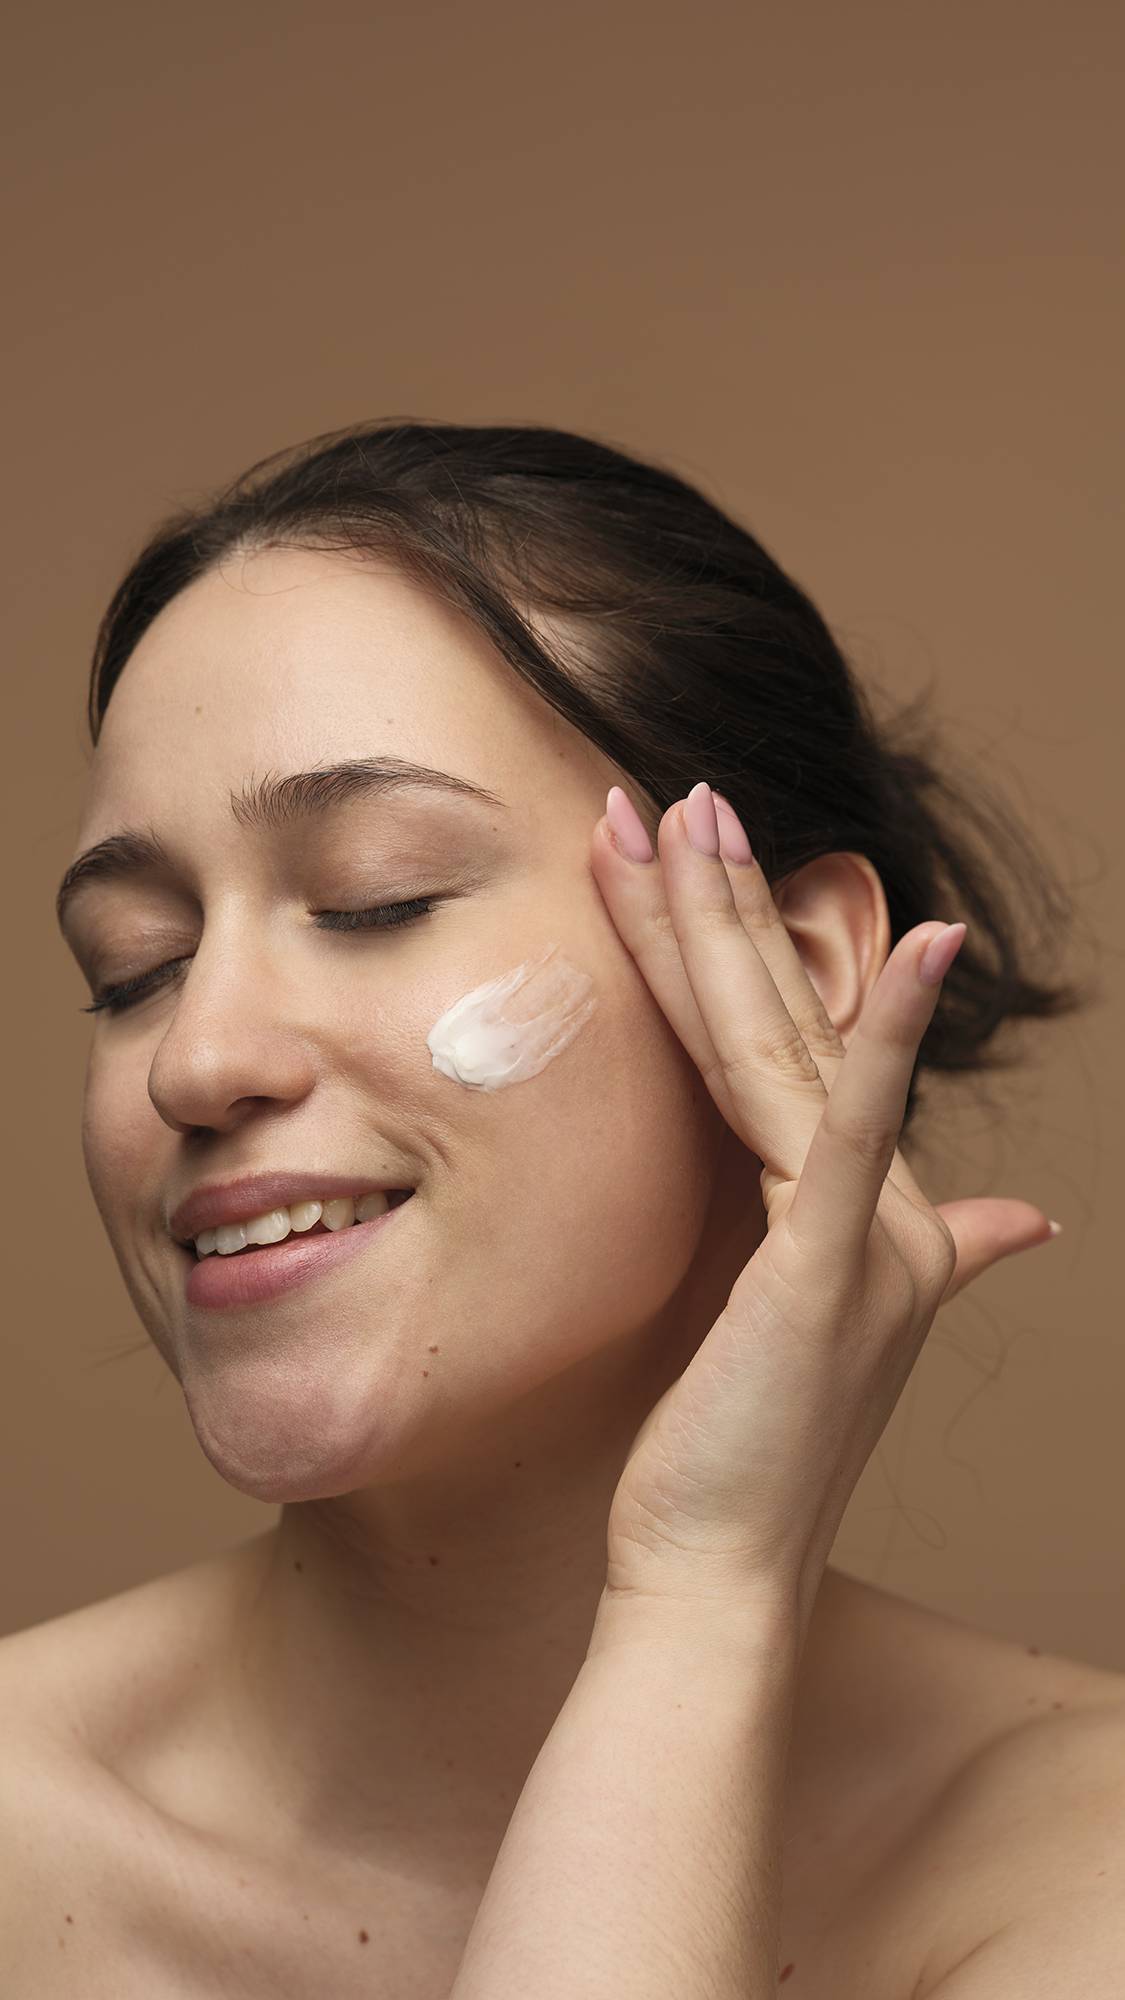 The image shows the model's face as their eyes are closed while they gently sweep the Peace moisturiser over their cheek. They are on a warm, earthy-brown background.